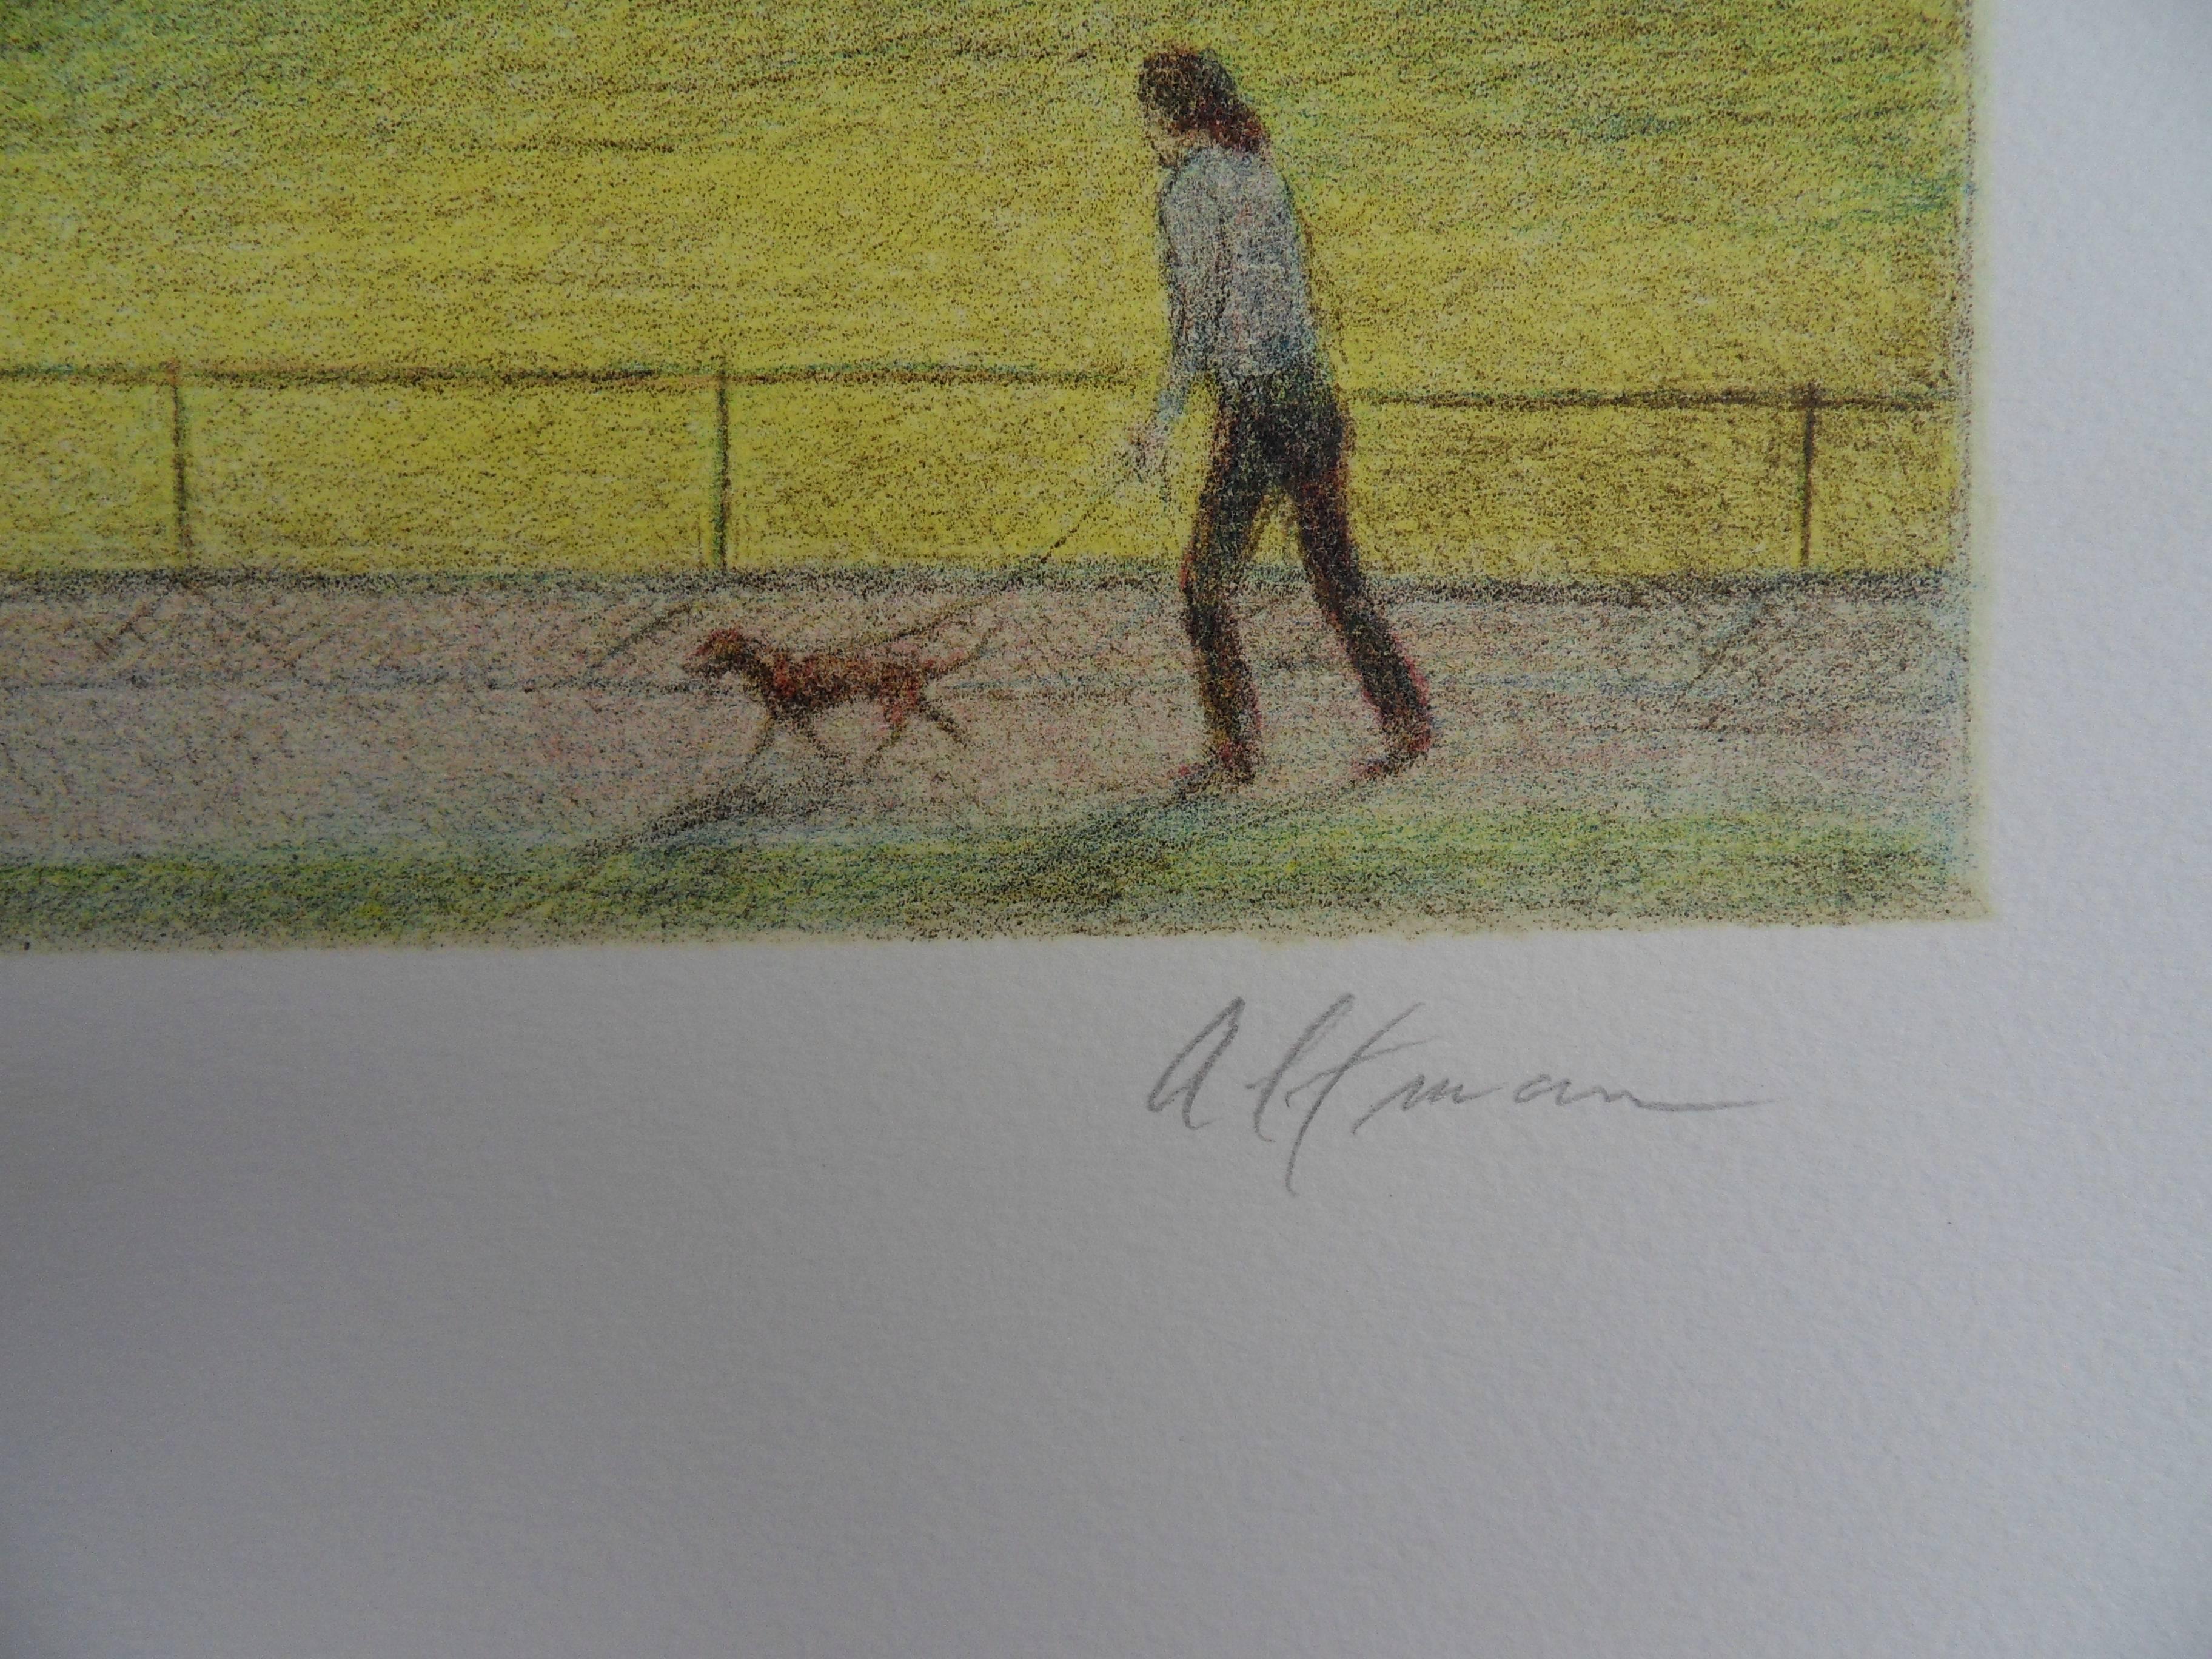 Central Park Views : A Walk With The Dog - Original handsigned lithograph - Print by Harold Altman